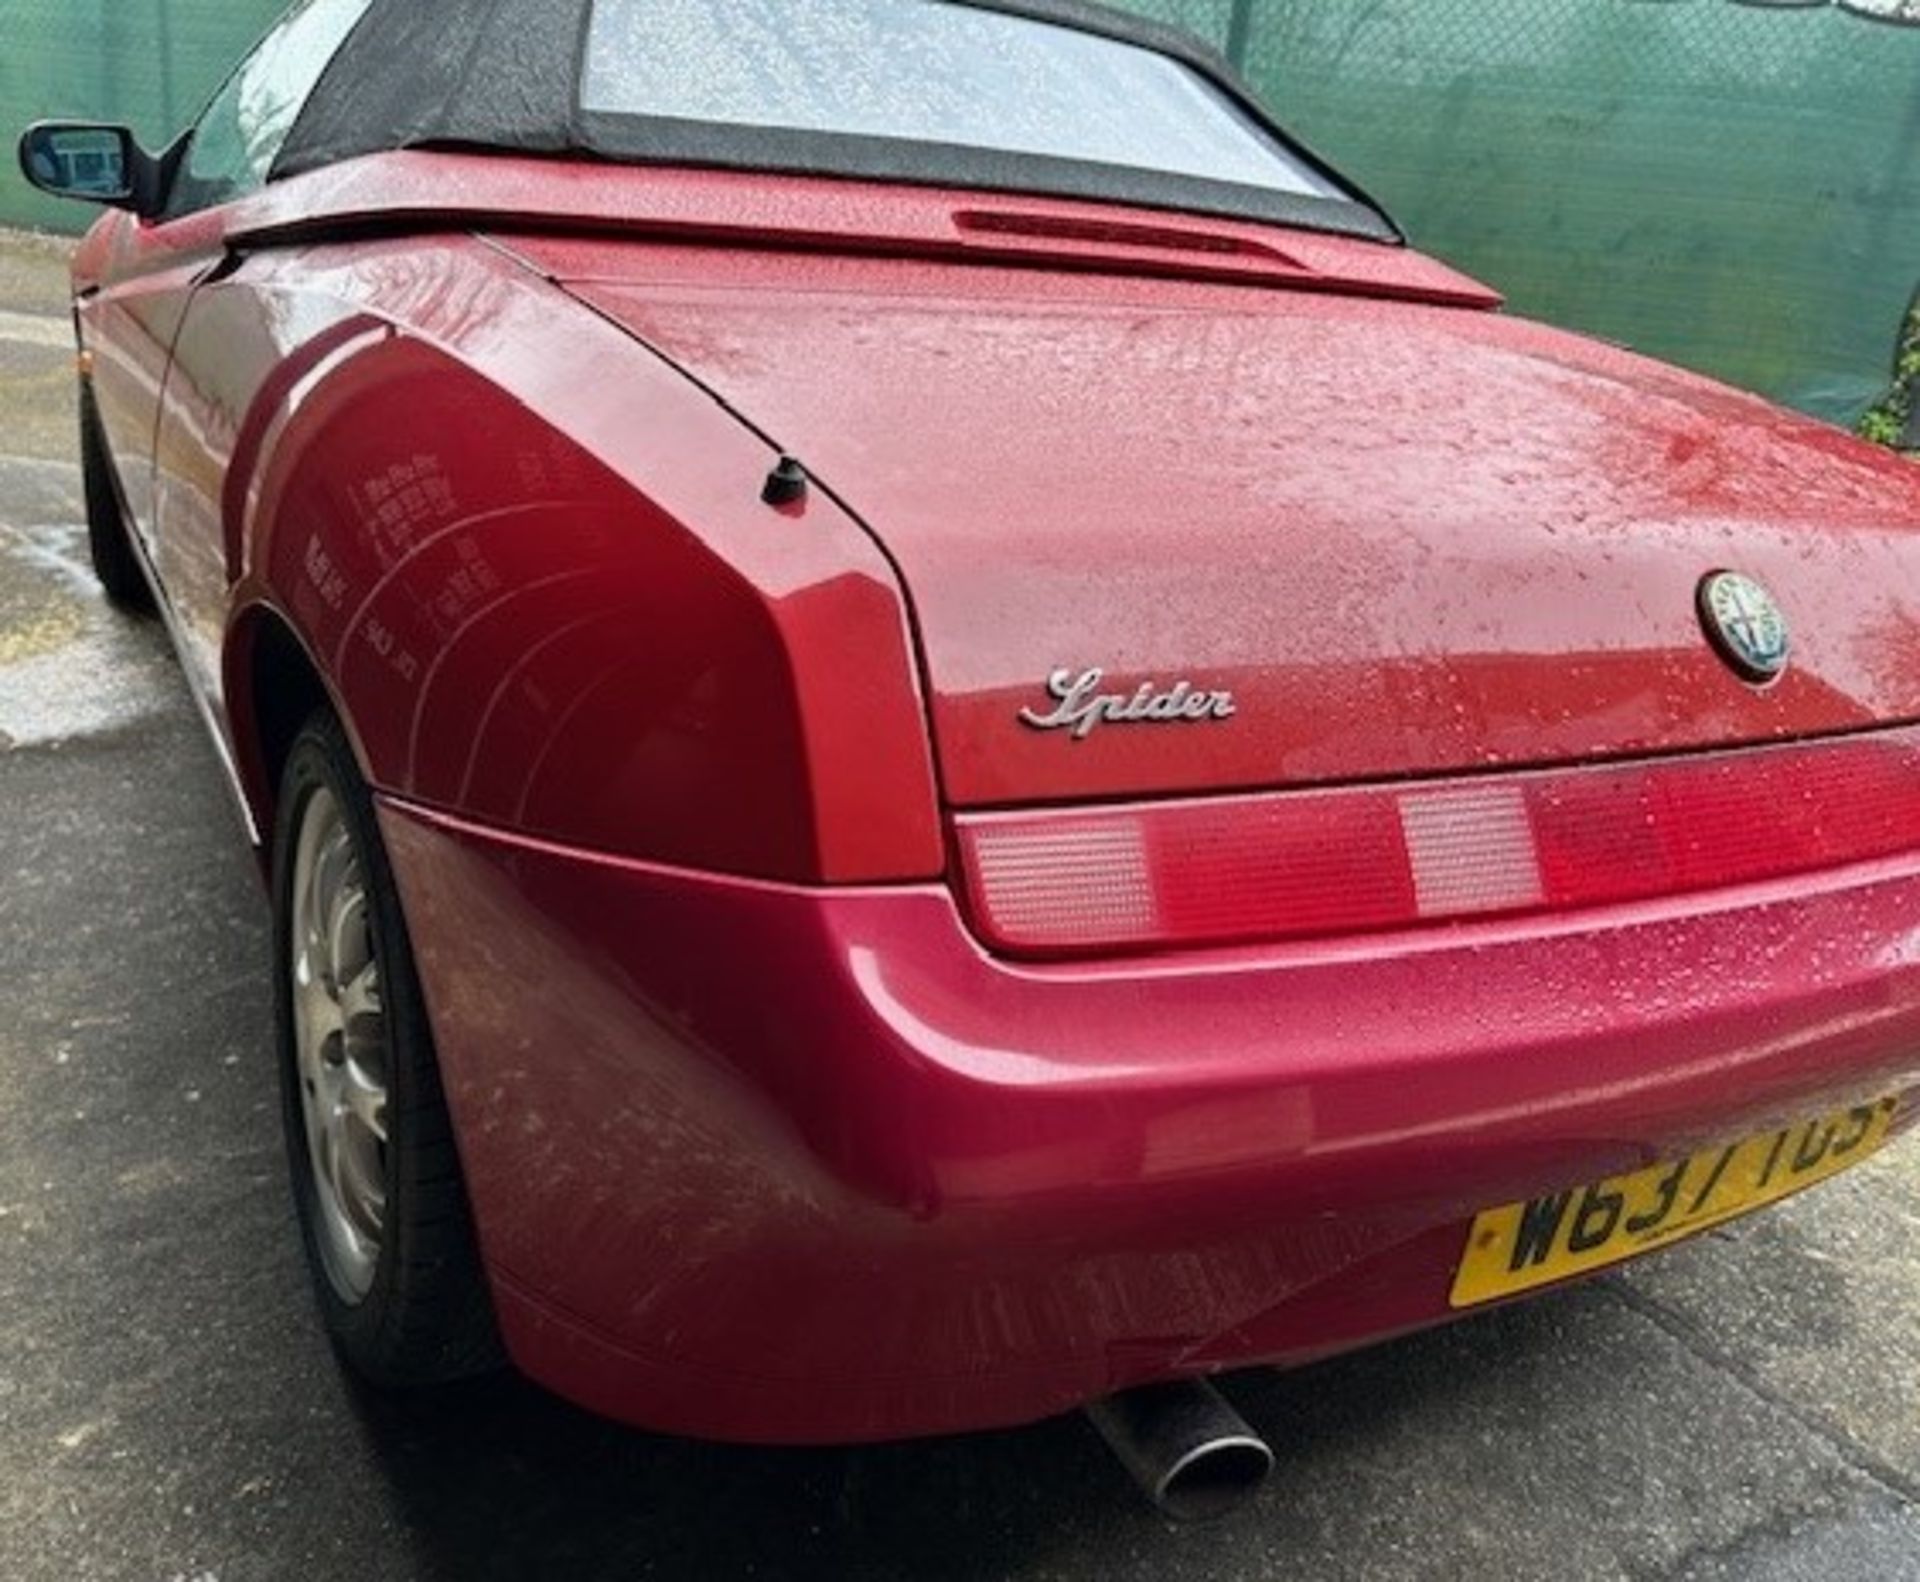 2000 Alfa Romeo Spider Lusso TS Spider Registration number W637 TGS Red with a black interior MOT - Image 3 of 14